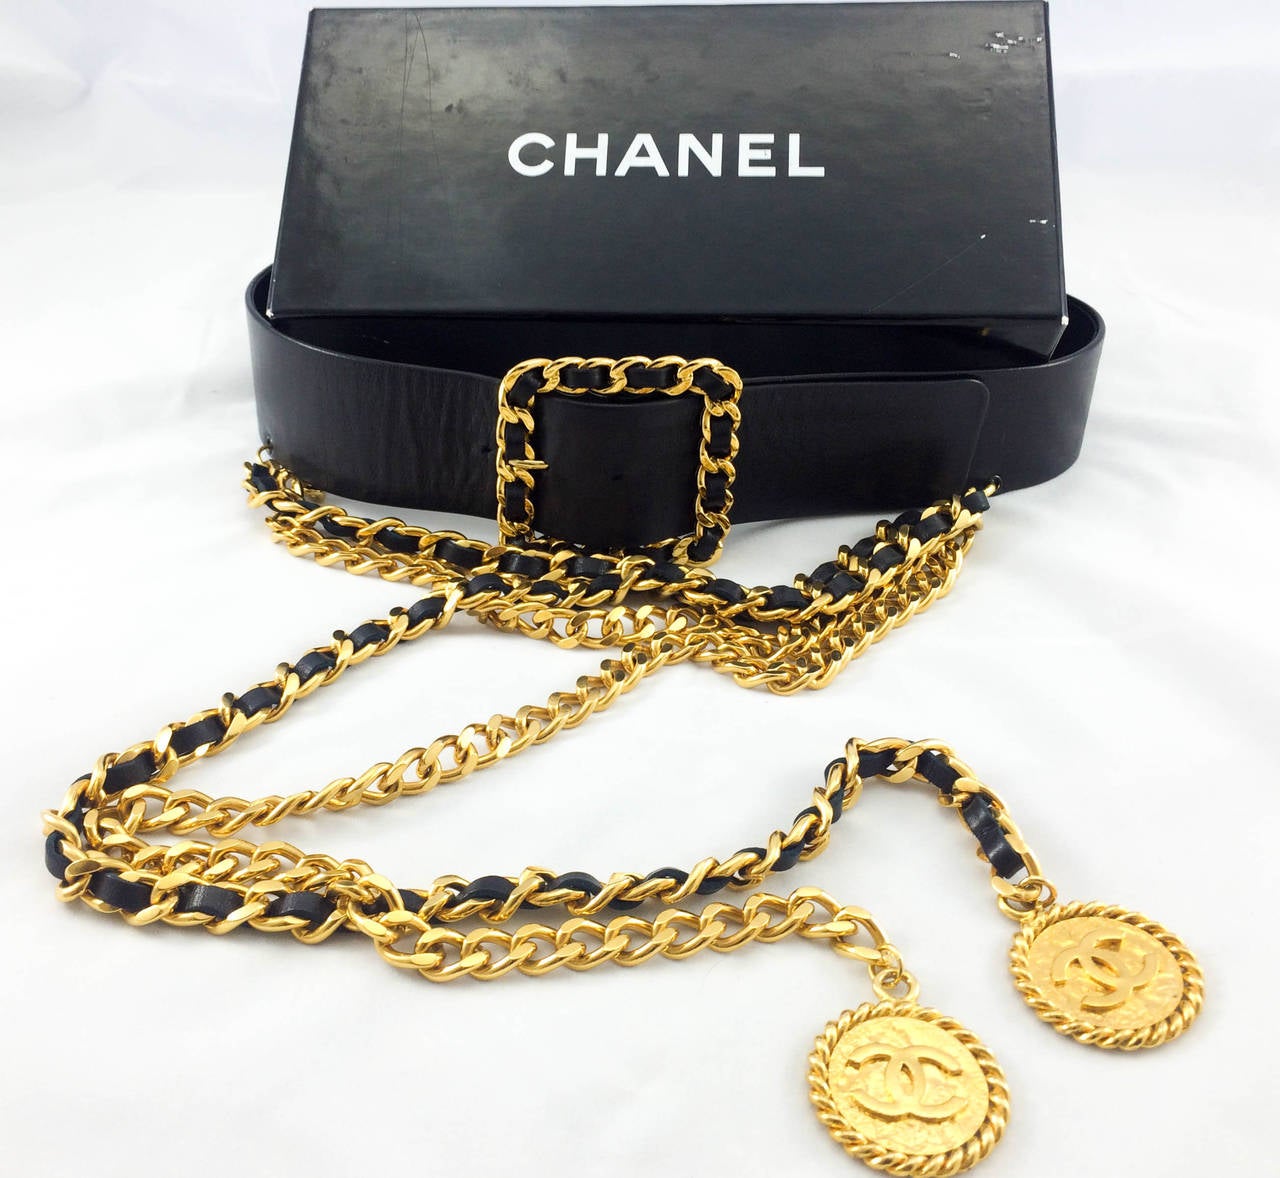 Chanel 1992 Runway Black Leather and Gold Tone Metal Belt 4